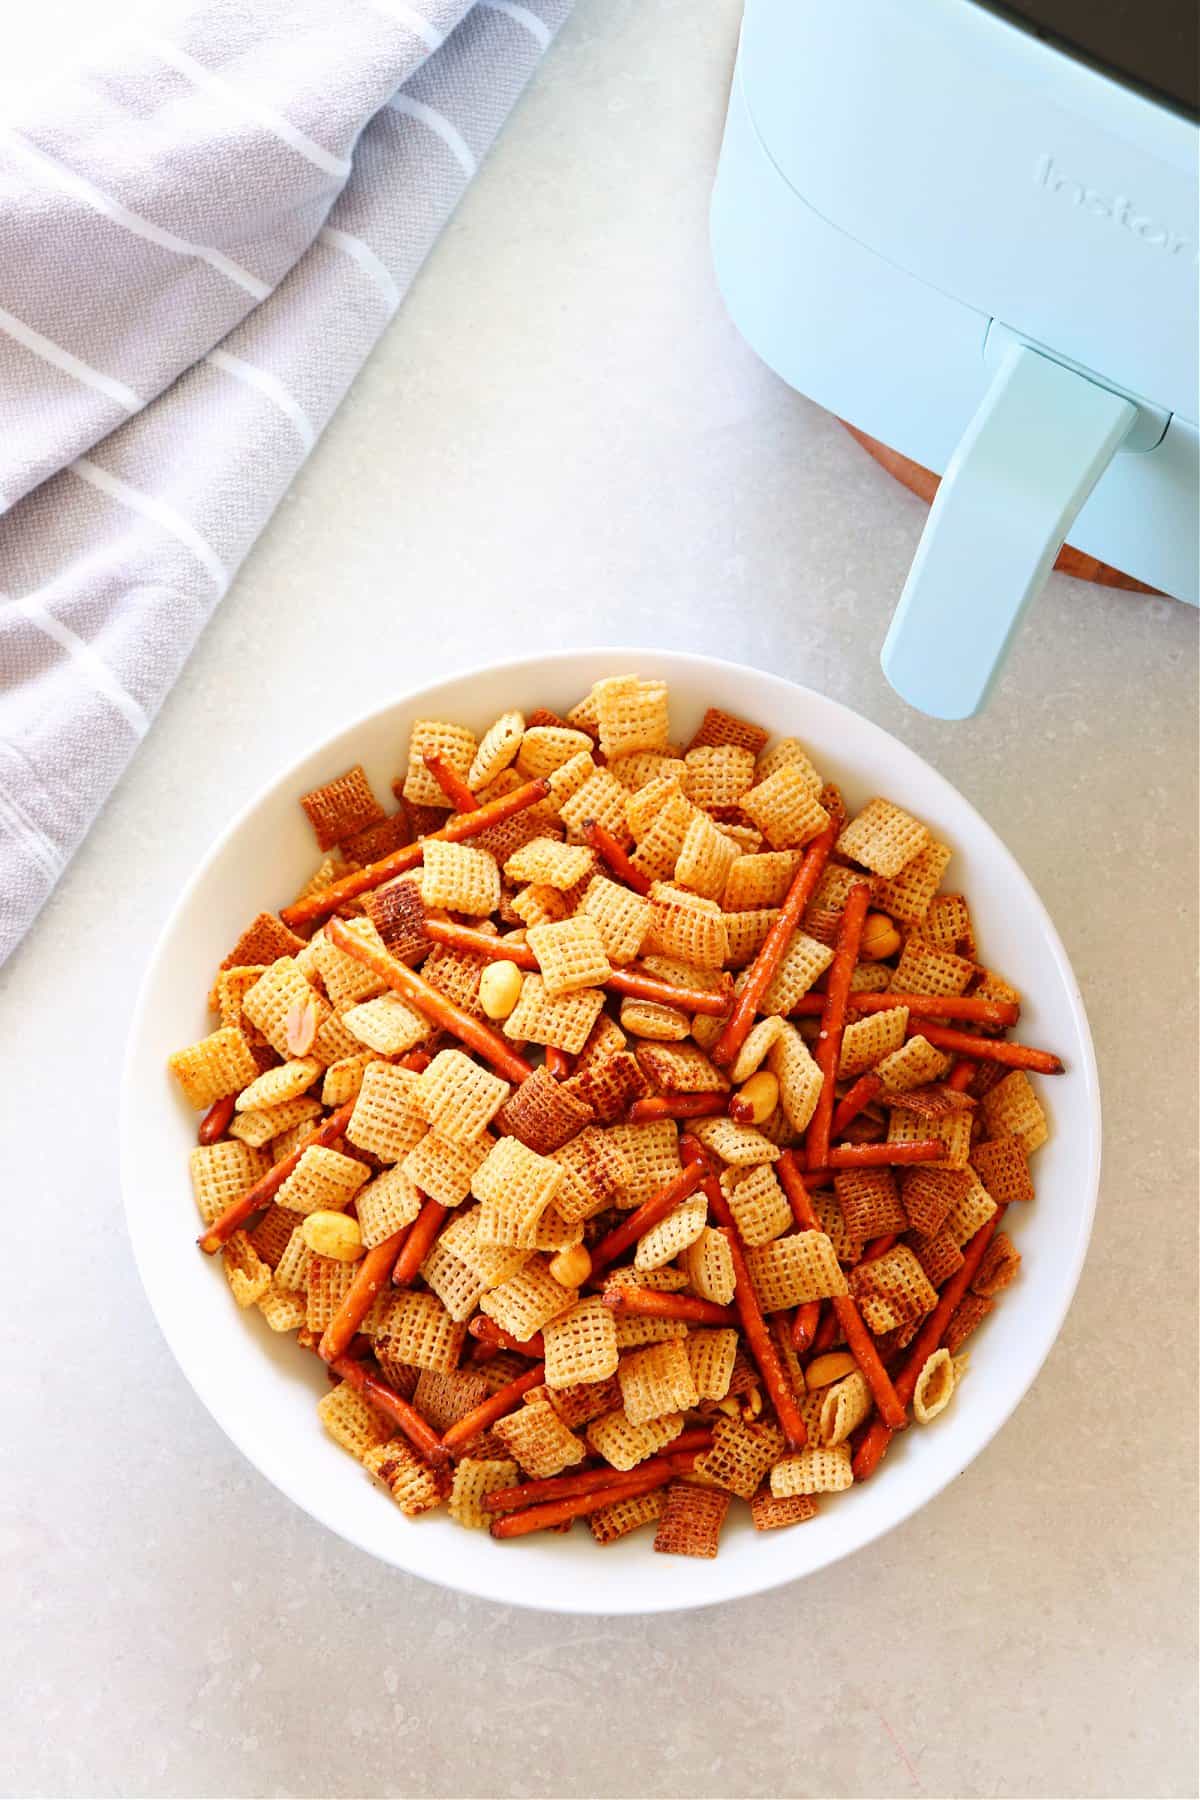 Party mix in white bowl next to air fryer.